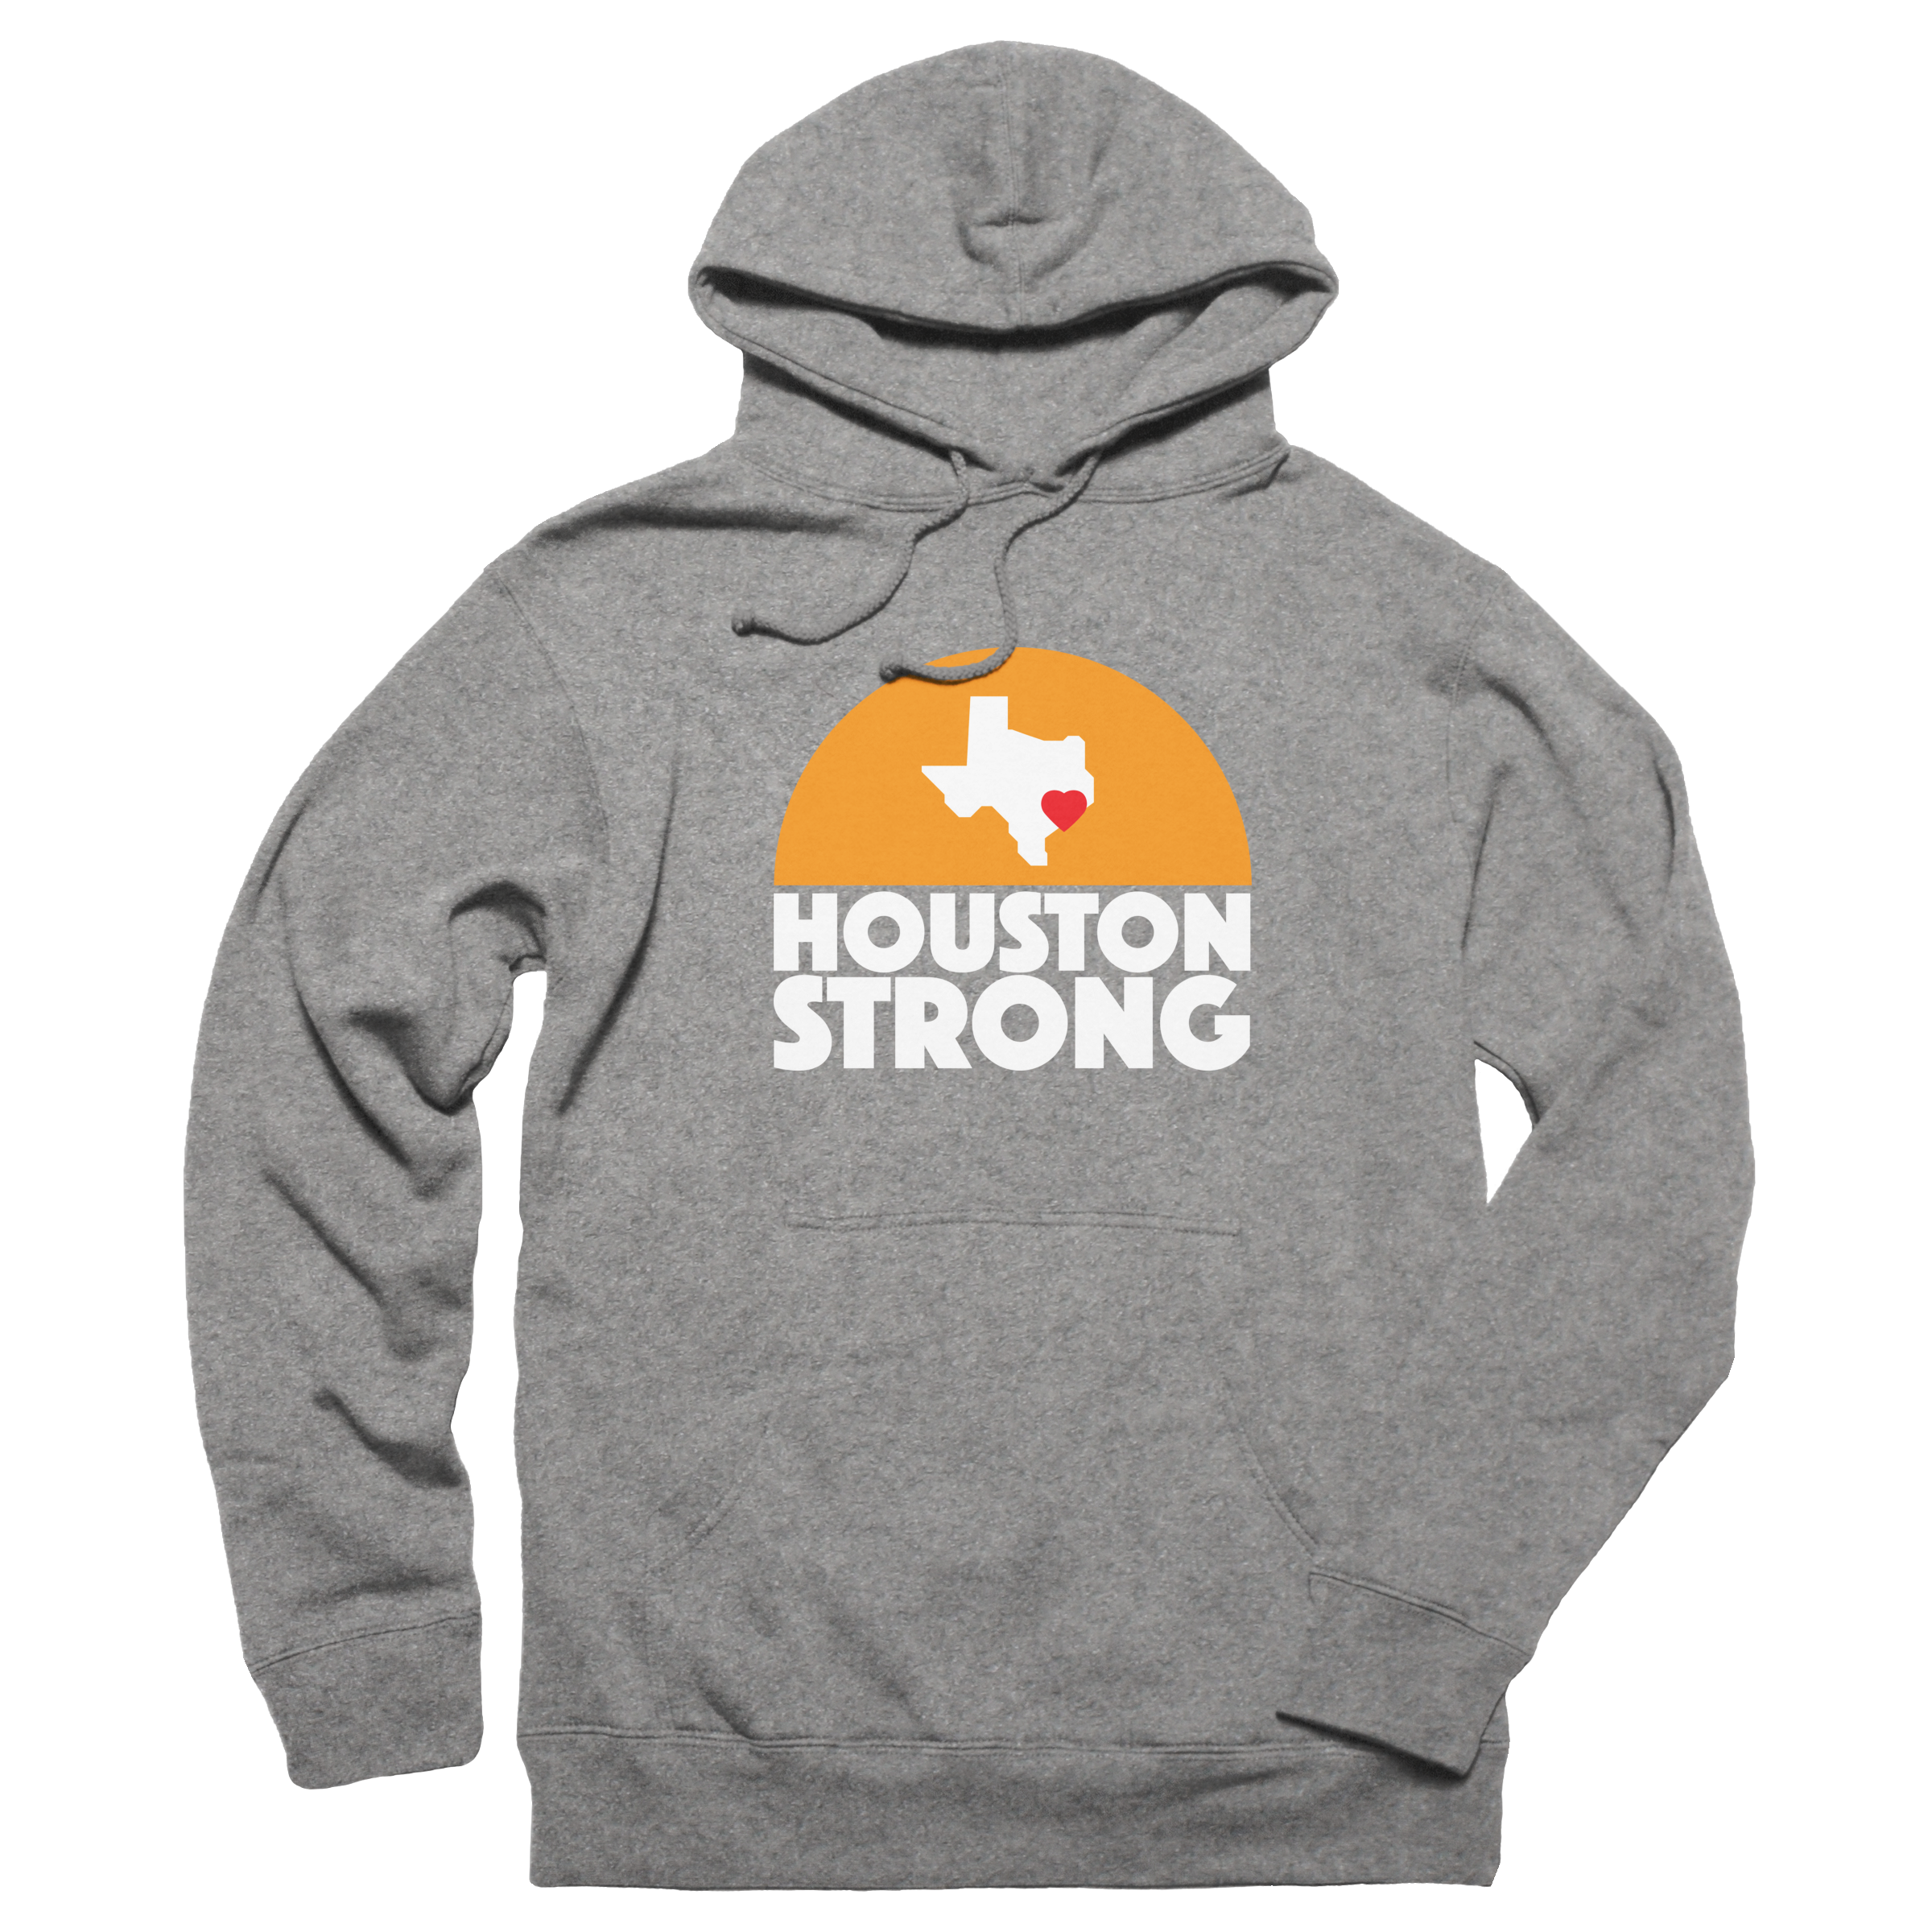 Houston Strong - Hoodie